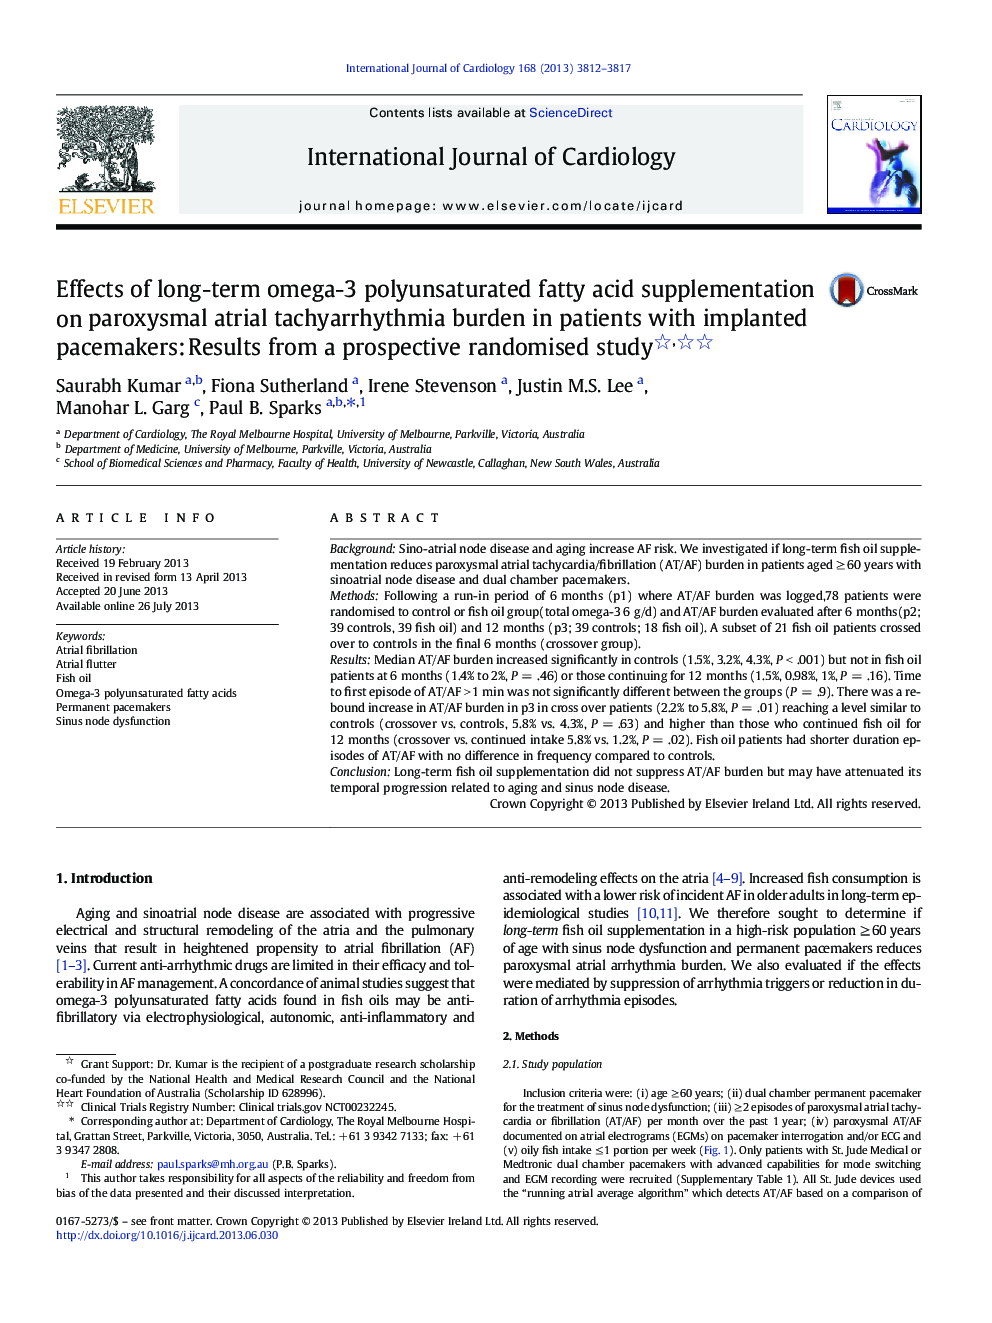 Effects of long-term omega-3 polyunsaturated fatty acid supplementation on paroxysmal atrial tachyarrhythmia burden in patients with implanted pacemakers: Results from a prospective randomised study